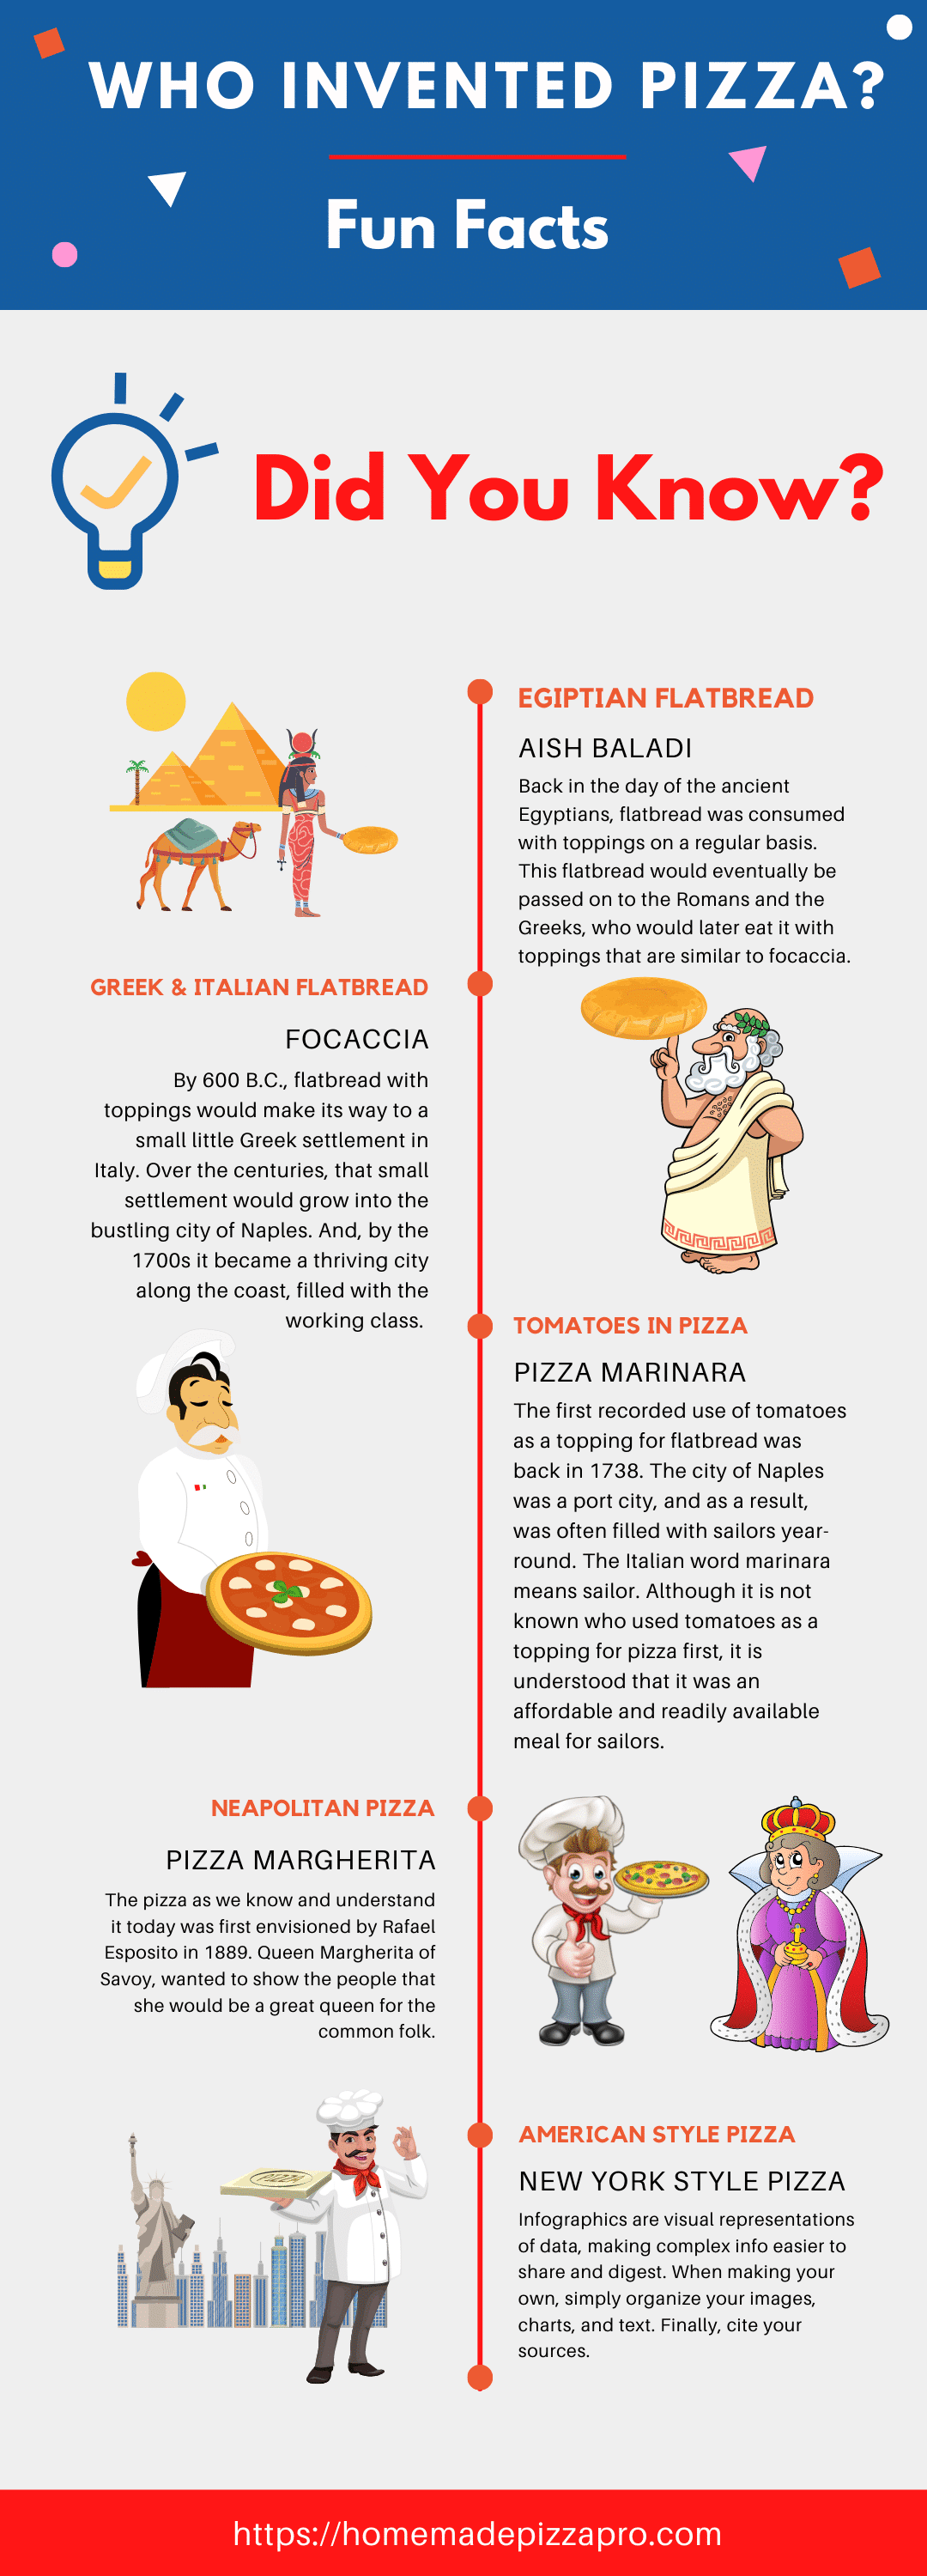 who invented pizza infographic